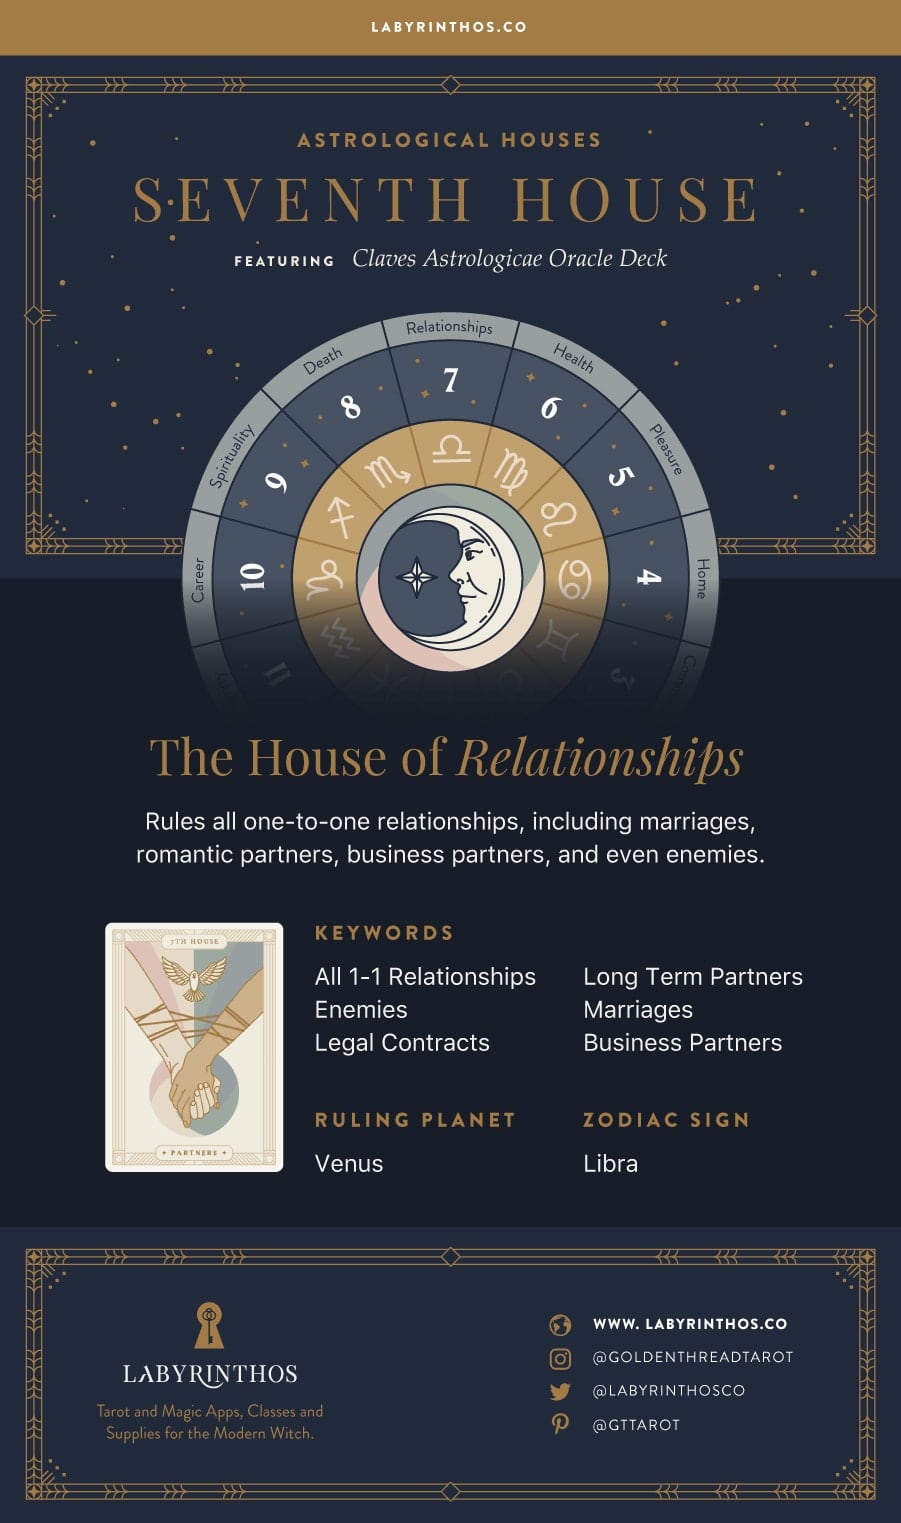 what is the 7th house in vedic astrology